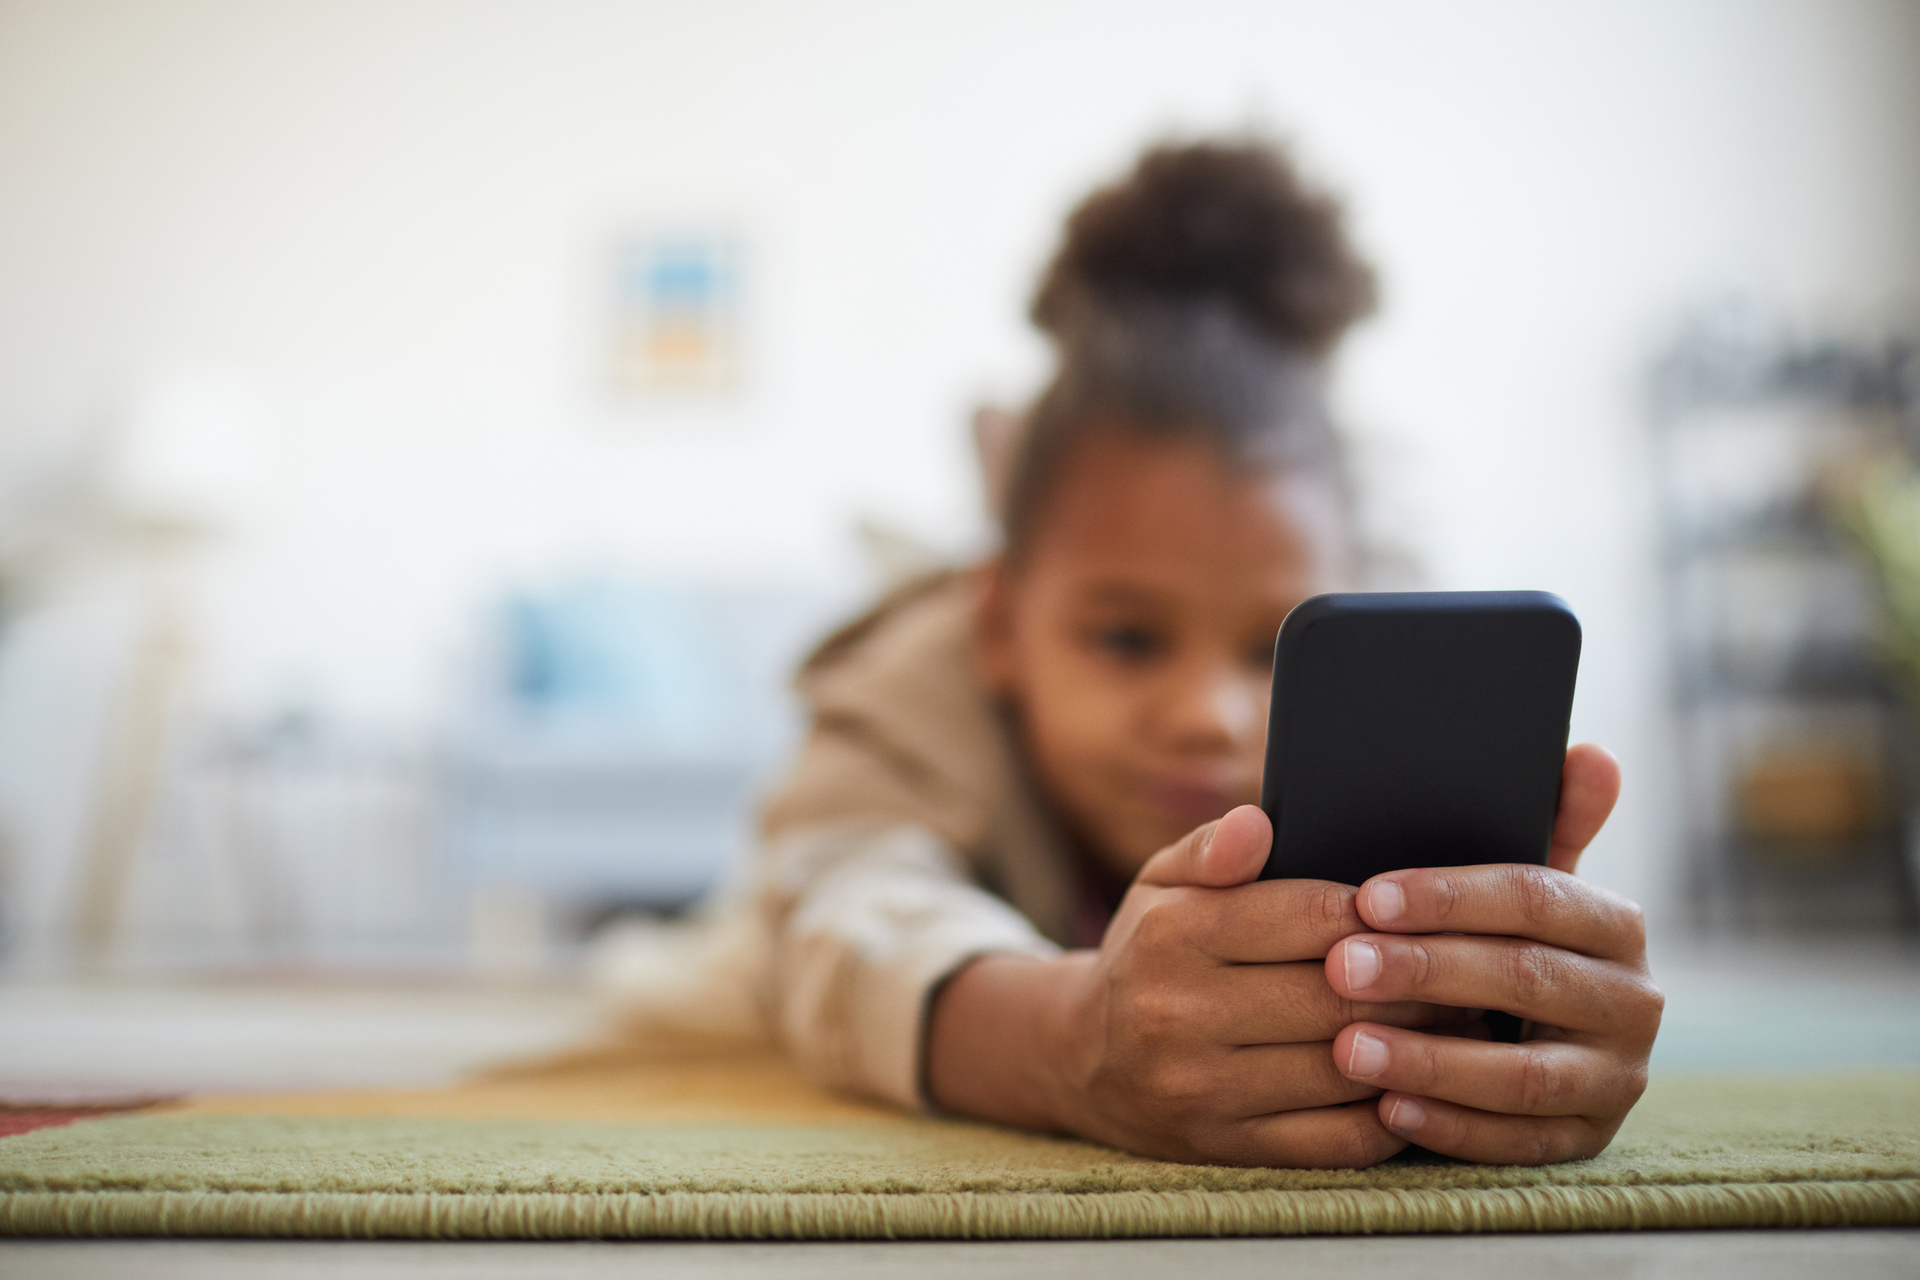 A child using a phone